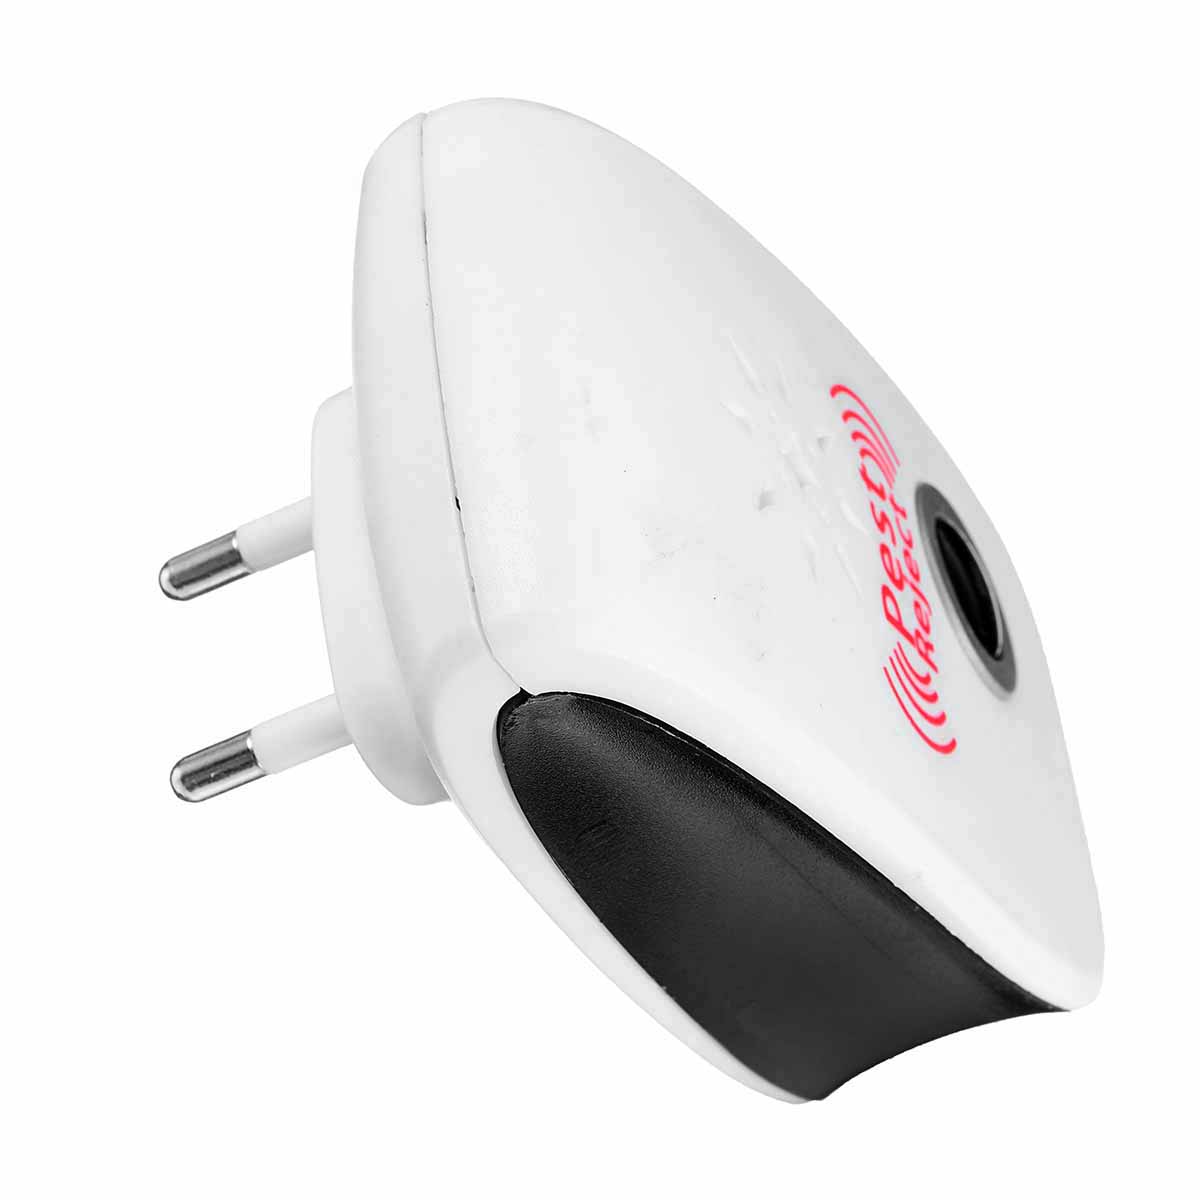 Ultrasonic-Mosquito-Repellent-Mosquito-Double-Horn-Mouse-Cockroach-Flea-Killer-1851125-10